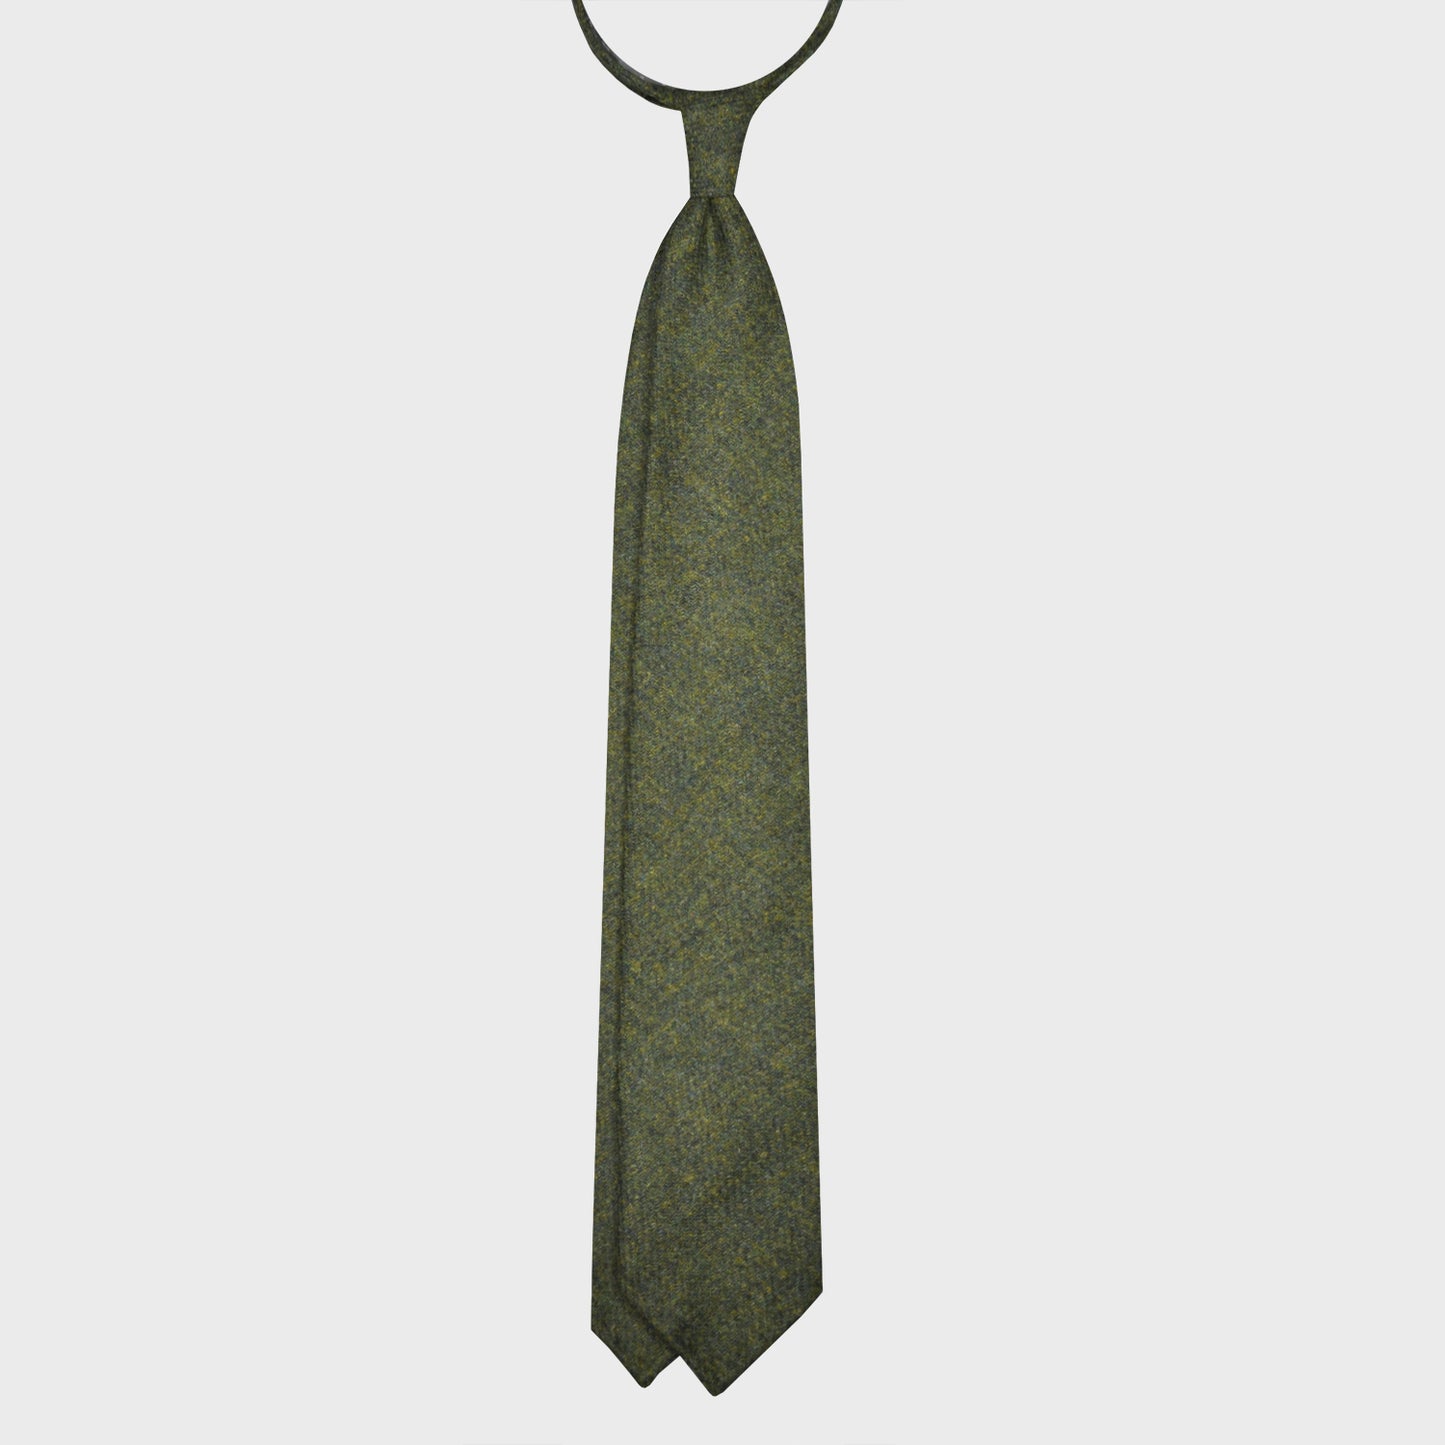 Load image into Gallery viewer, F.Marino Tweed Tie 3 Folds Grass Green-Wools Boutique Uomo
